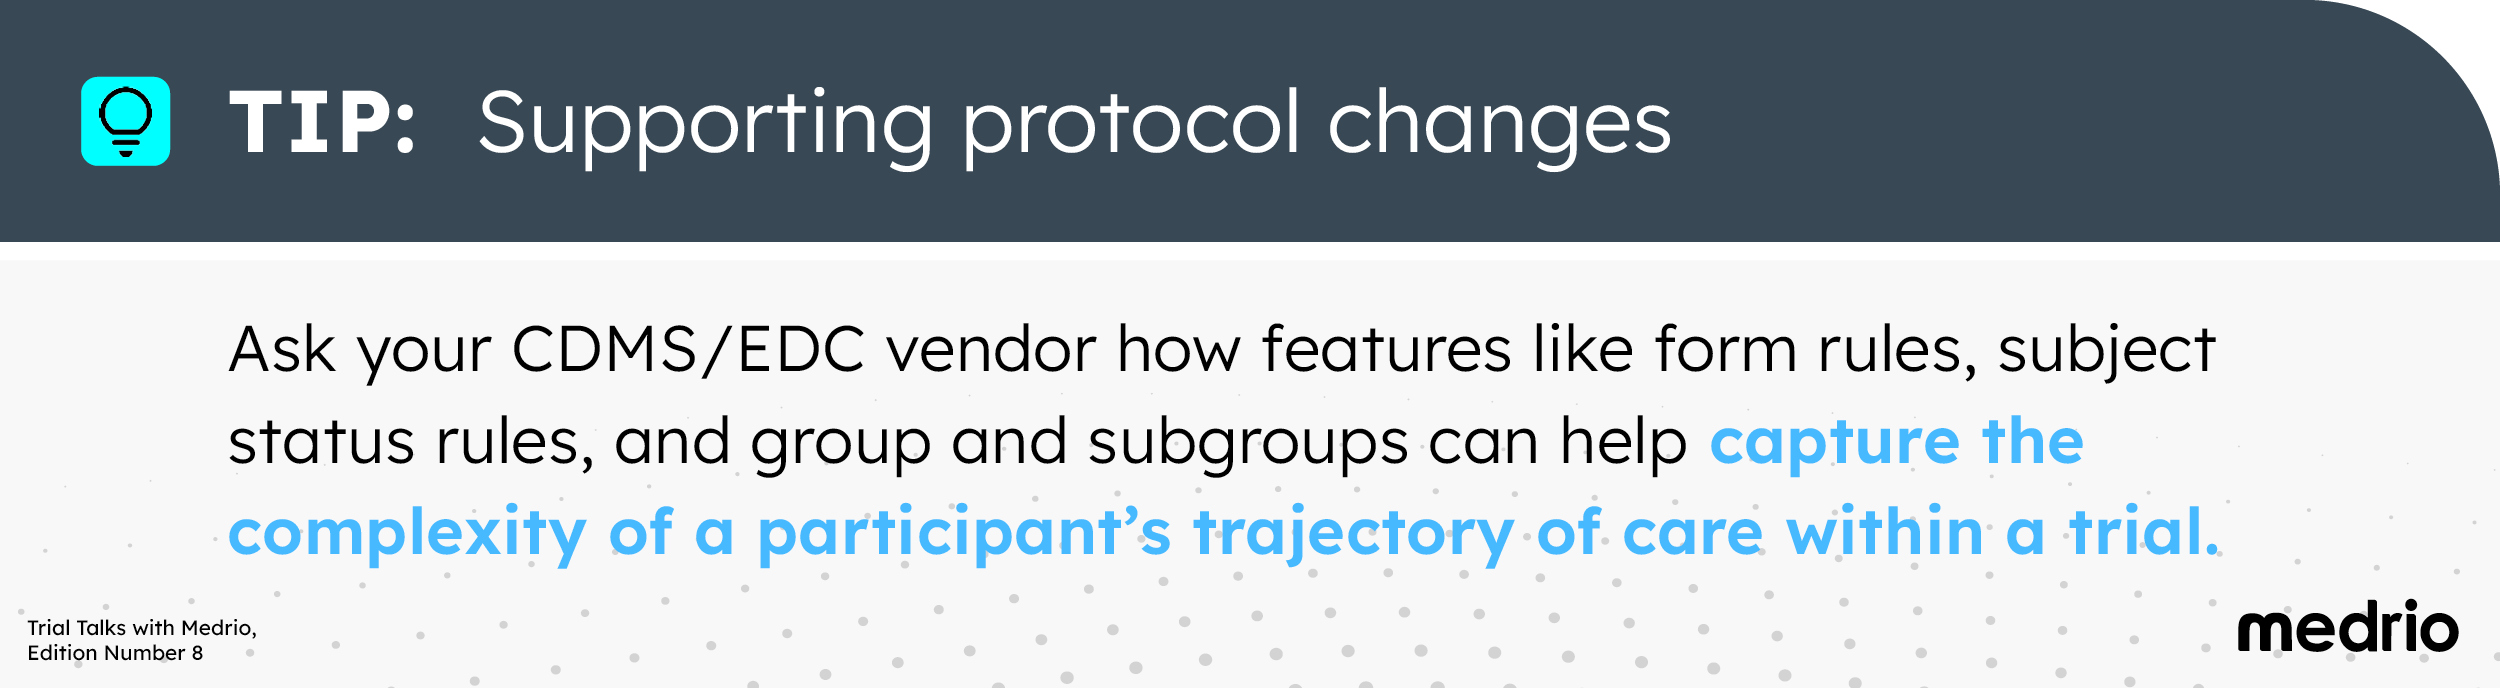 [Image] Tip for supporting protocol changes - Ask your CDMS/EDC vendor how features like form rules, subject status rule, and group and subgroups can help capture the complexity of a participant’s trajectory of care within a trial.